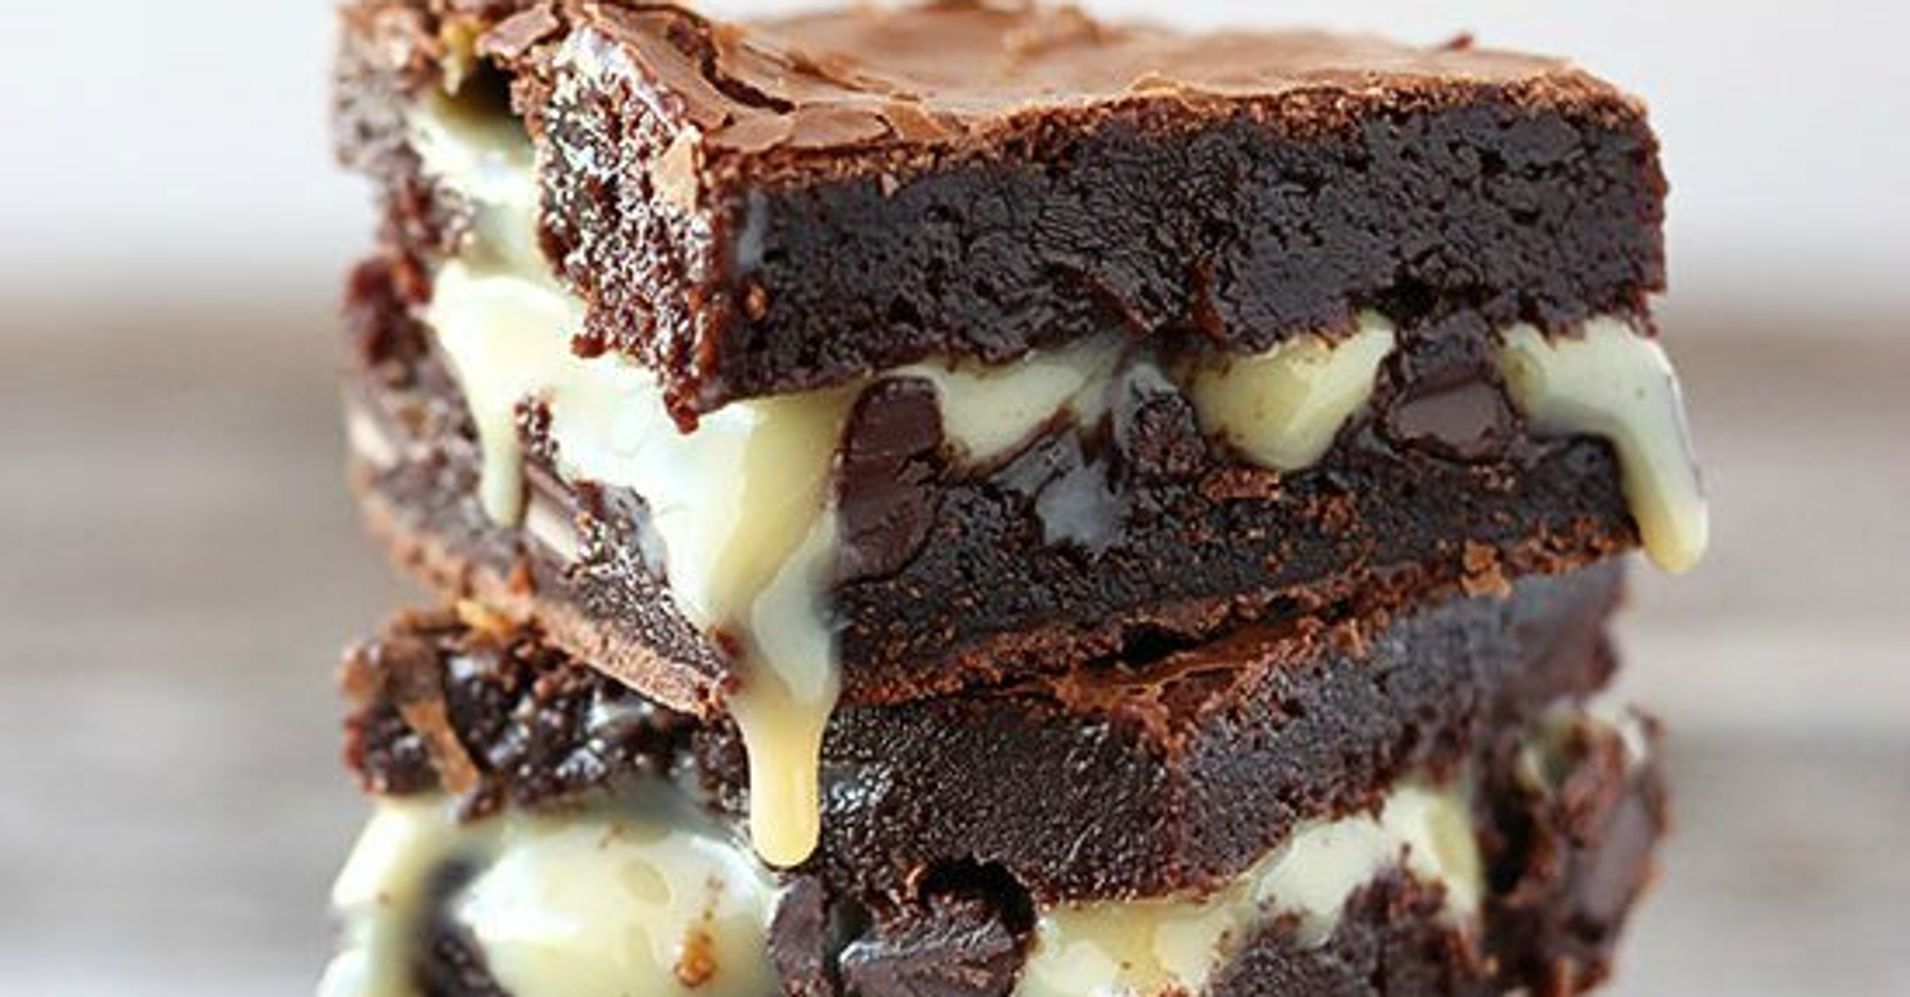 50 Of The Best Dessert Recipes Of All Time | HuffPost Life